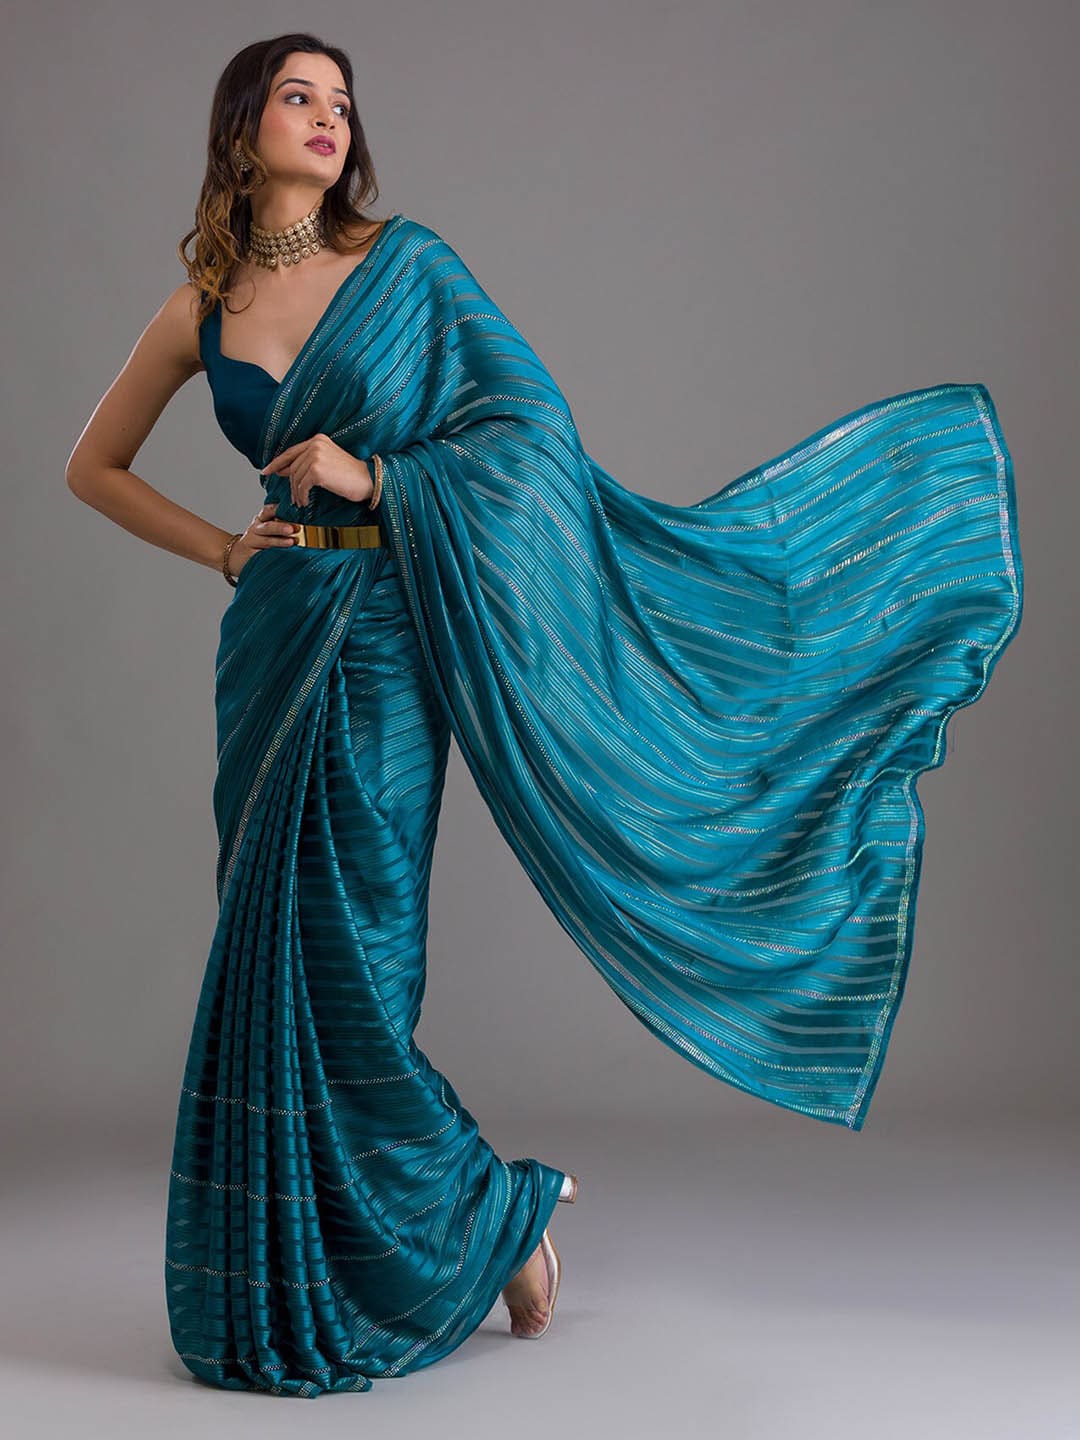 Koskii Blue & Silver-Toned Striped Beads and Stones Saree Price in India